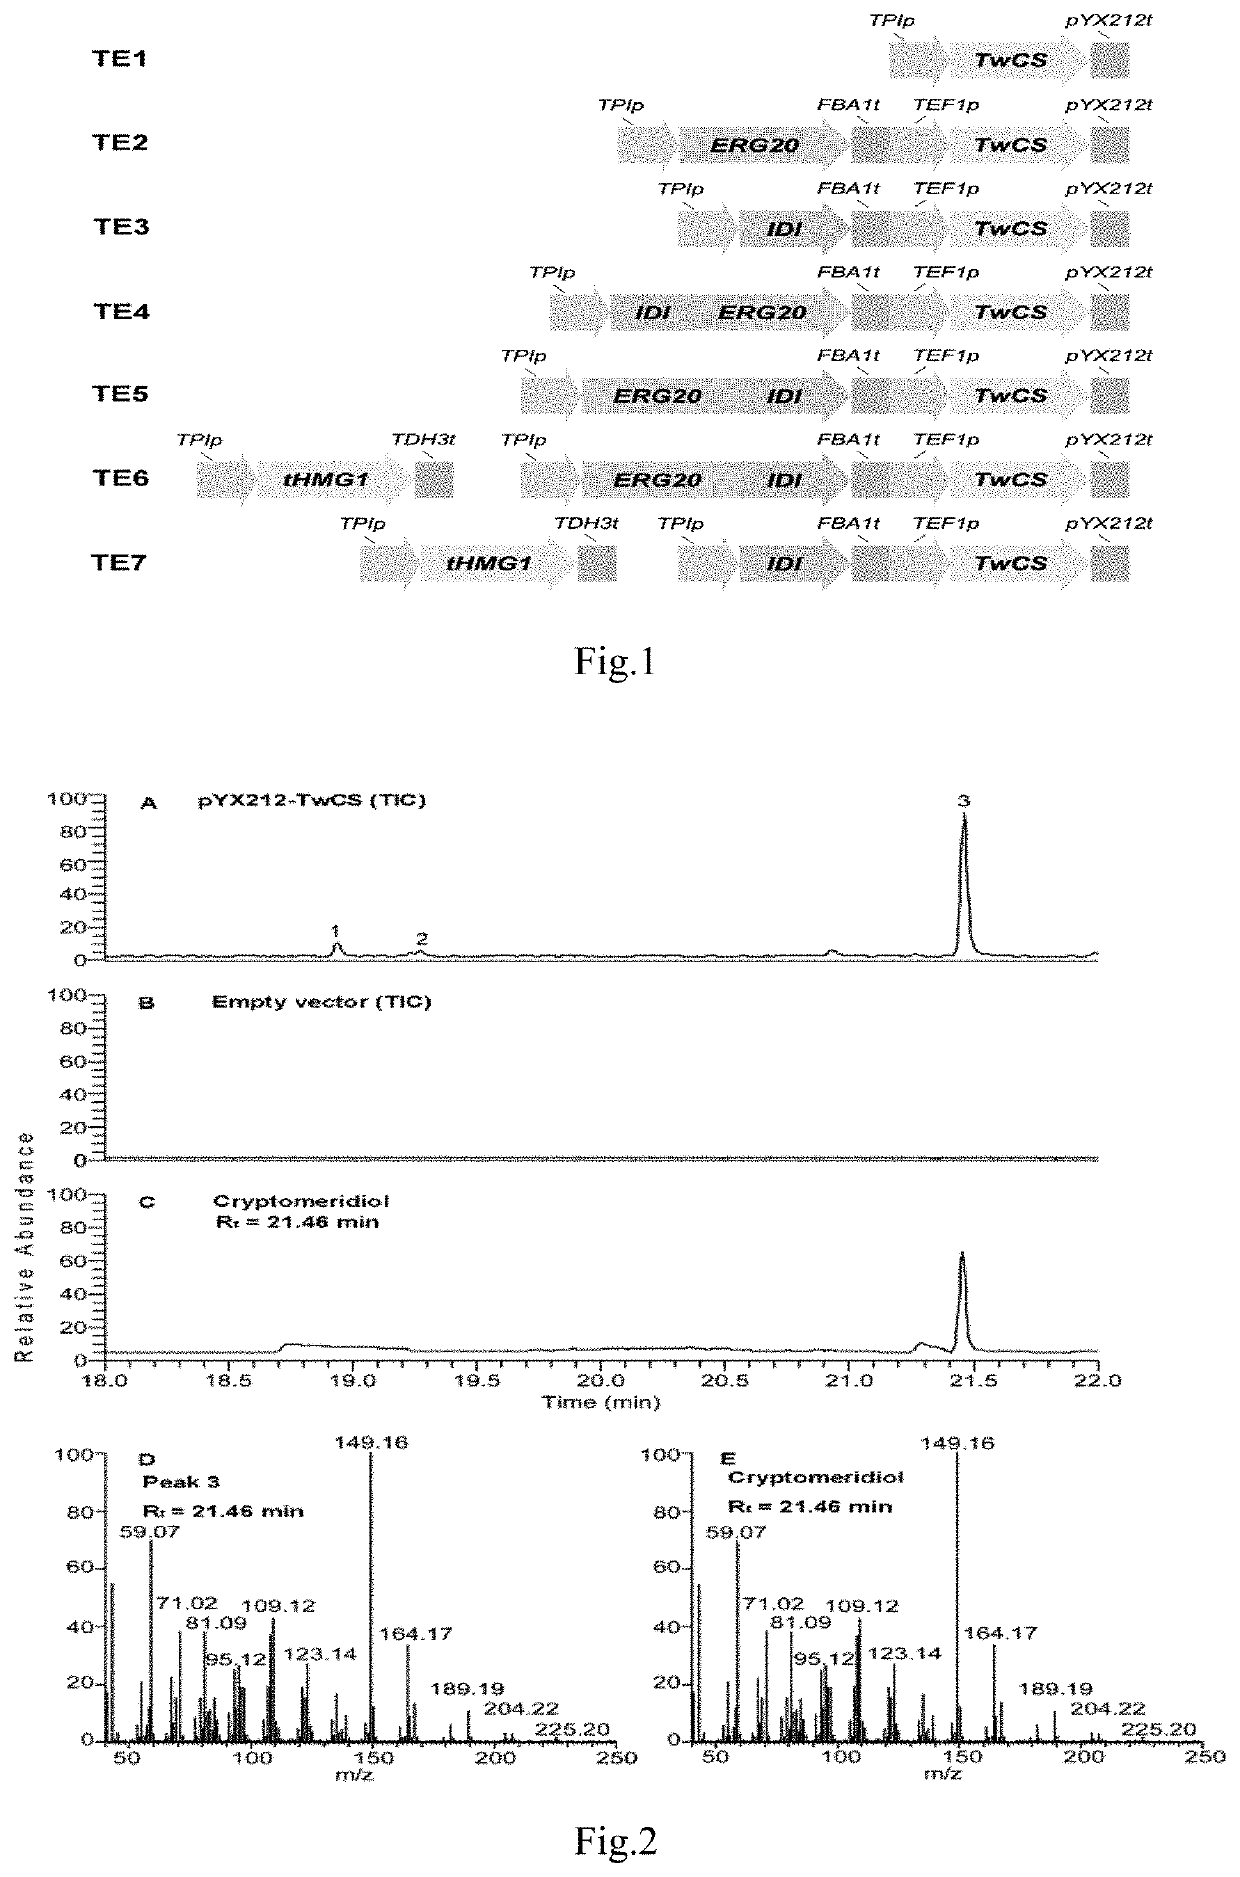 Tripterygium wilfordii cryptomeridiol synthase, coding gene thereof and recombinant yeast containing coding gene